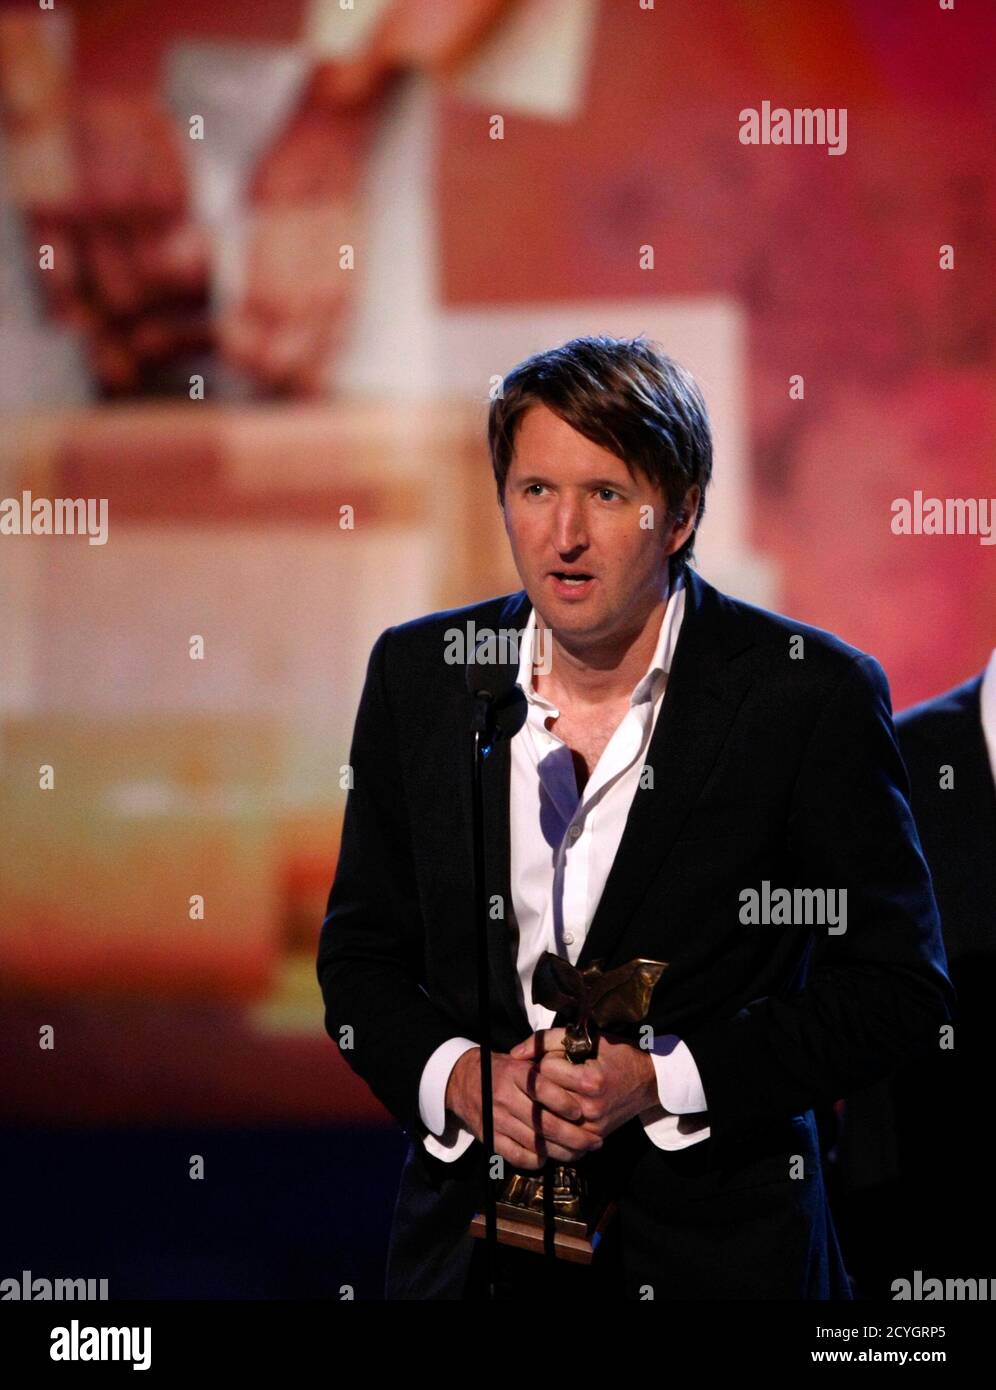 British director Tom Hooper accepts the best foreign film award for 'The King's Speech' during the 2011 Film Independent Spirit Awards in Santa Monica, California February 26, 2011. REUTERS/Rick Wilking (UNITED STATES - Tags: ENTERTAINMENT) Stock Photo